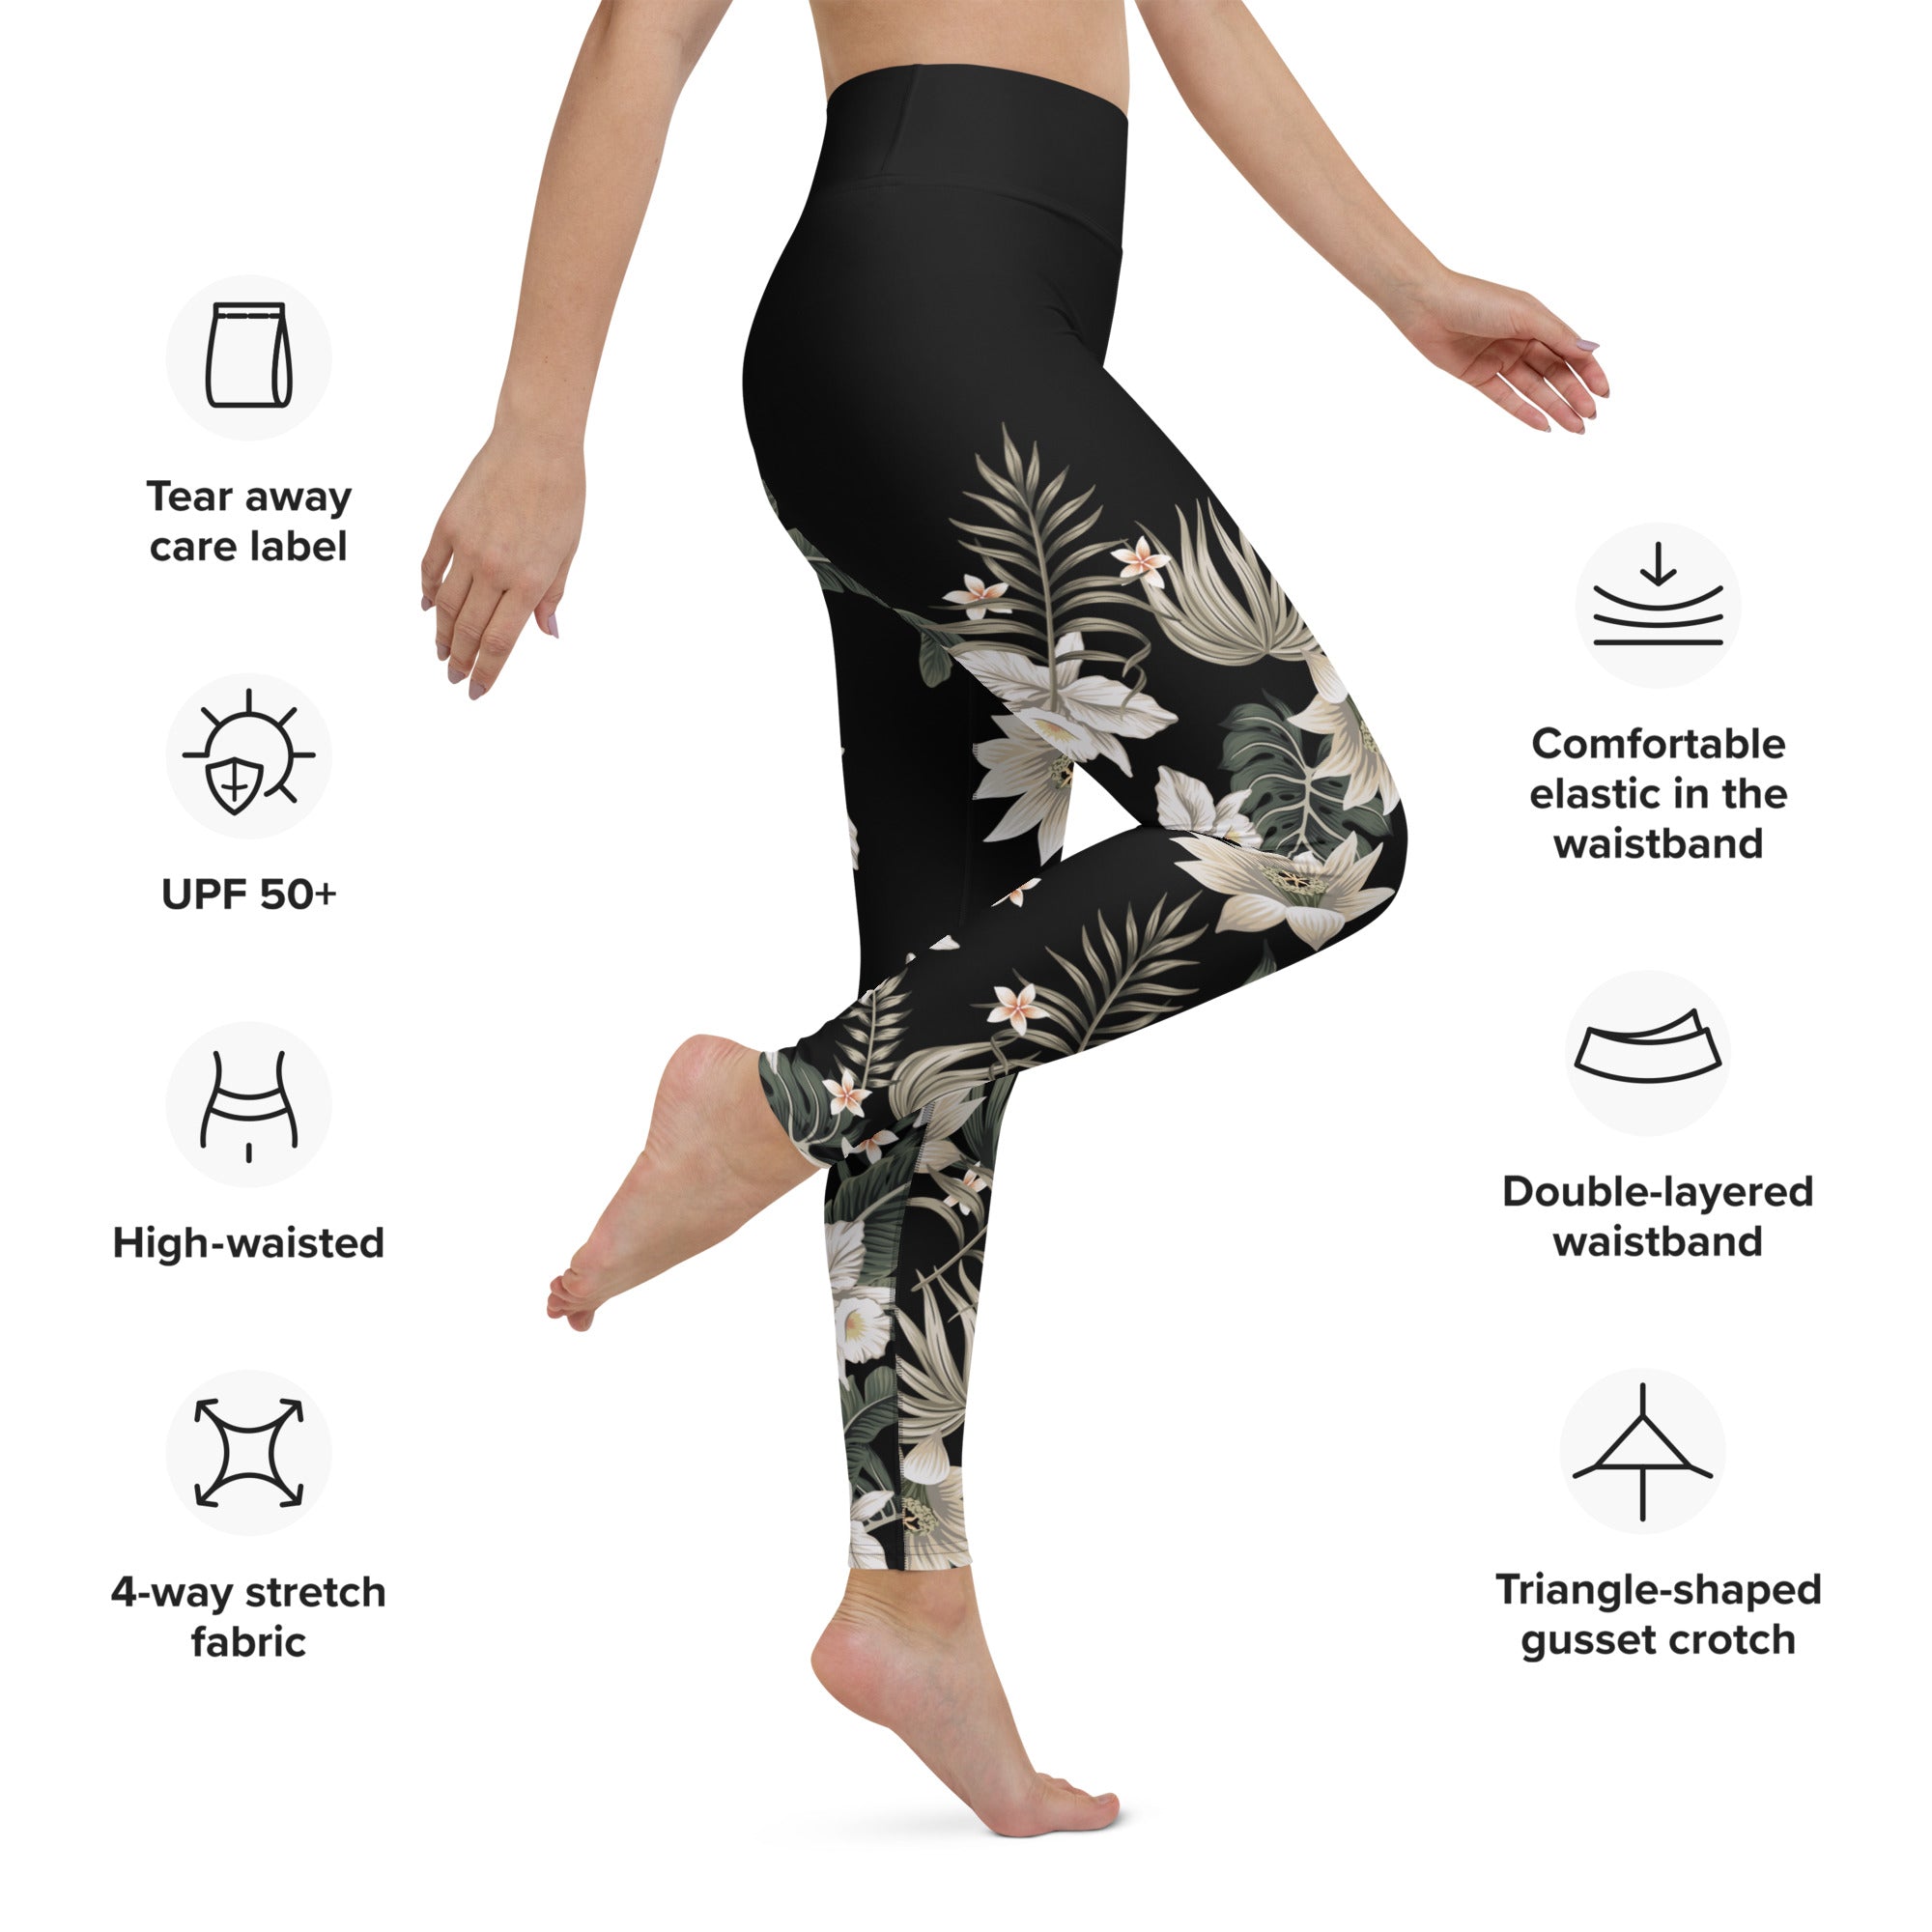 FLORAL LEGGINGS, White Yoga Leggings, White Floral Tights, Floral Stretch  Pants, White and Black Tights, Woman's Floral Tights 